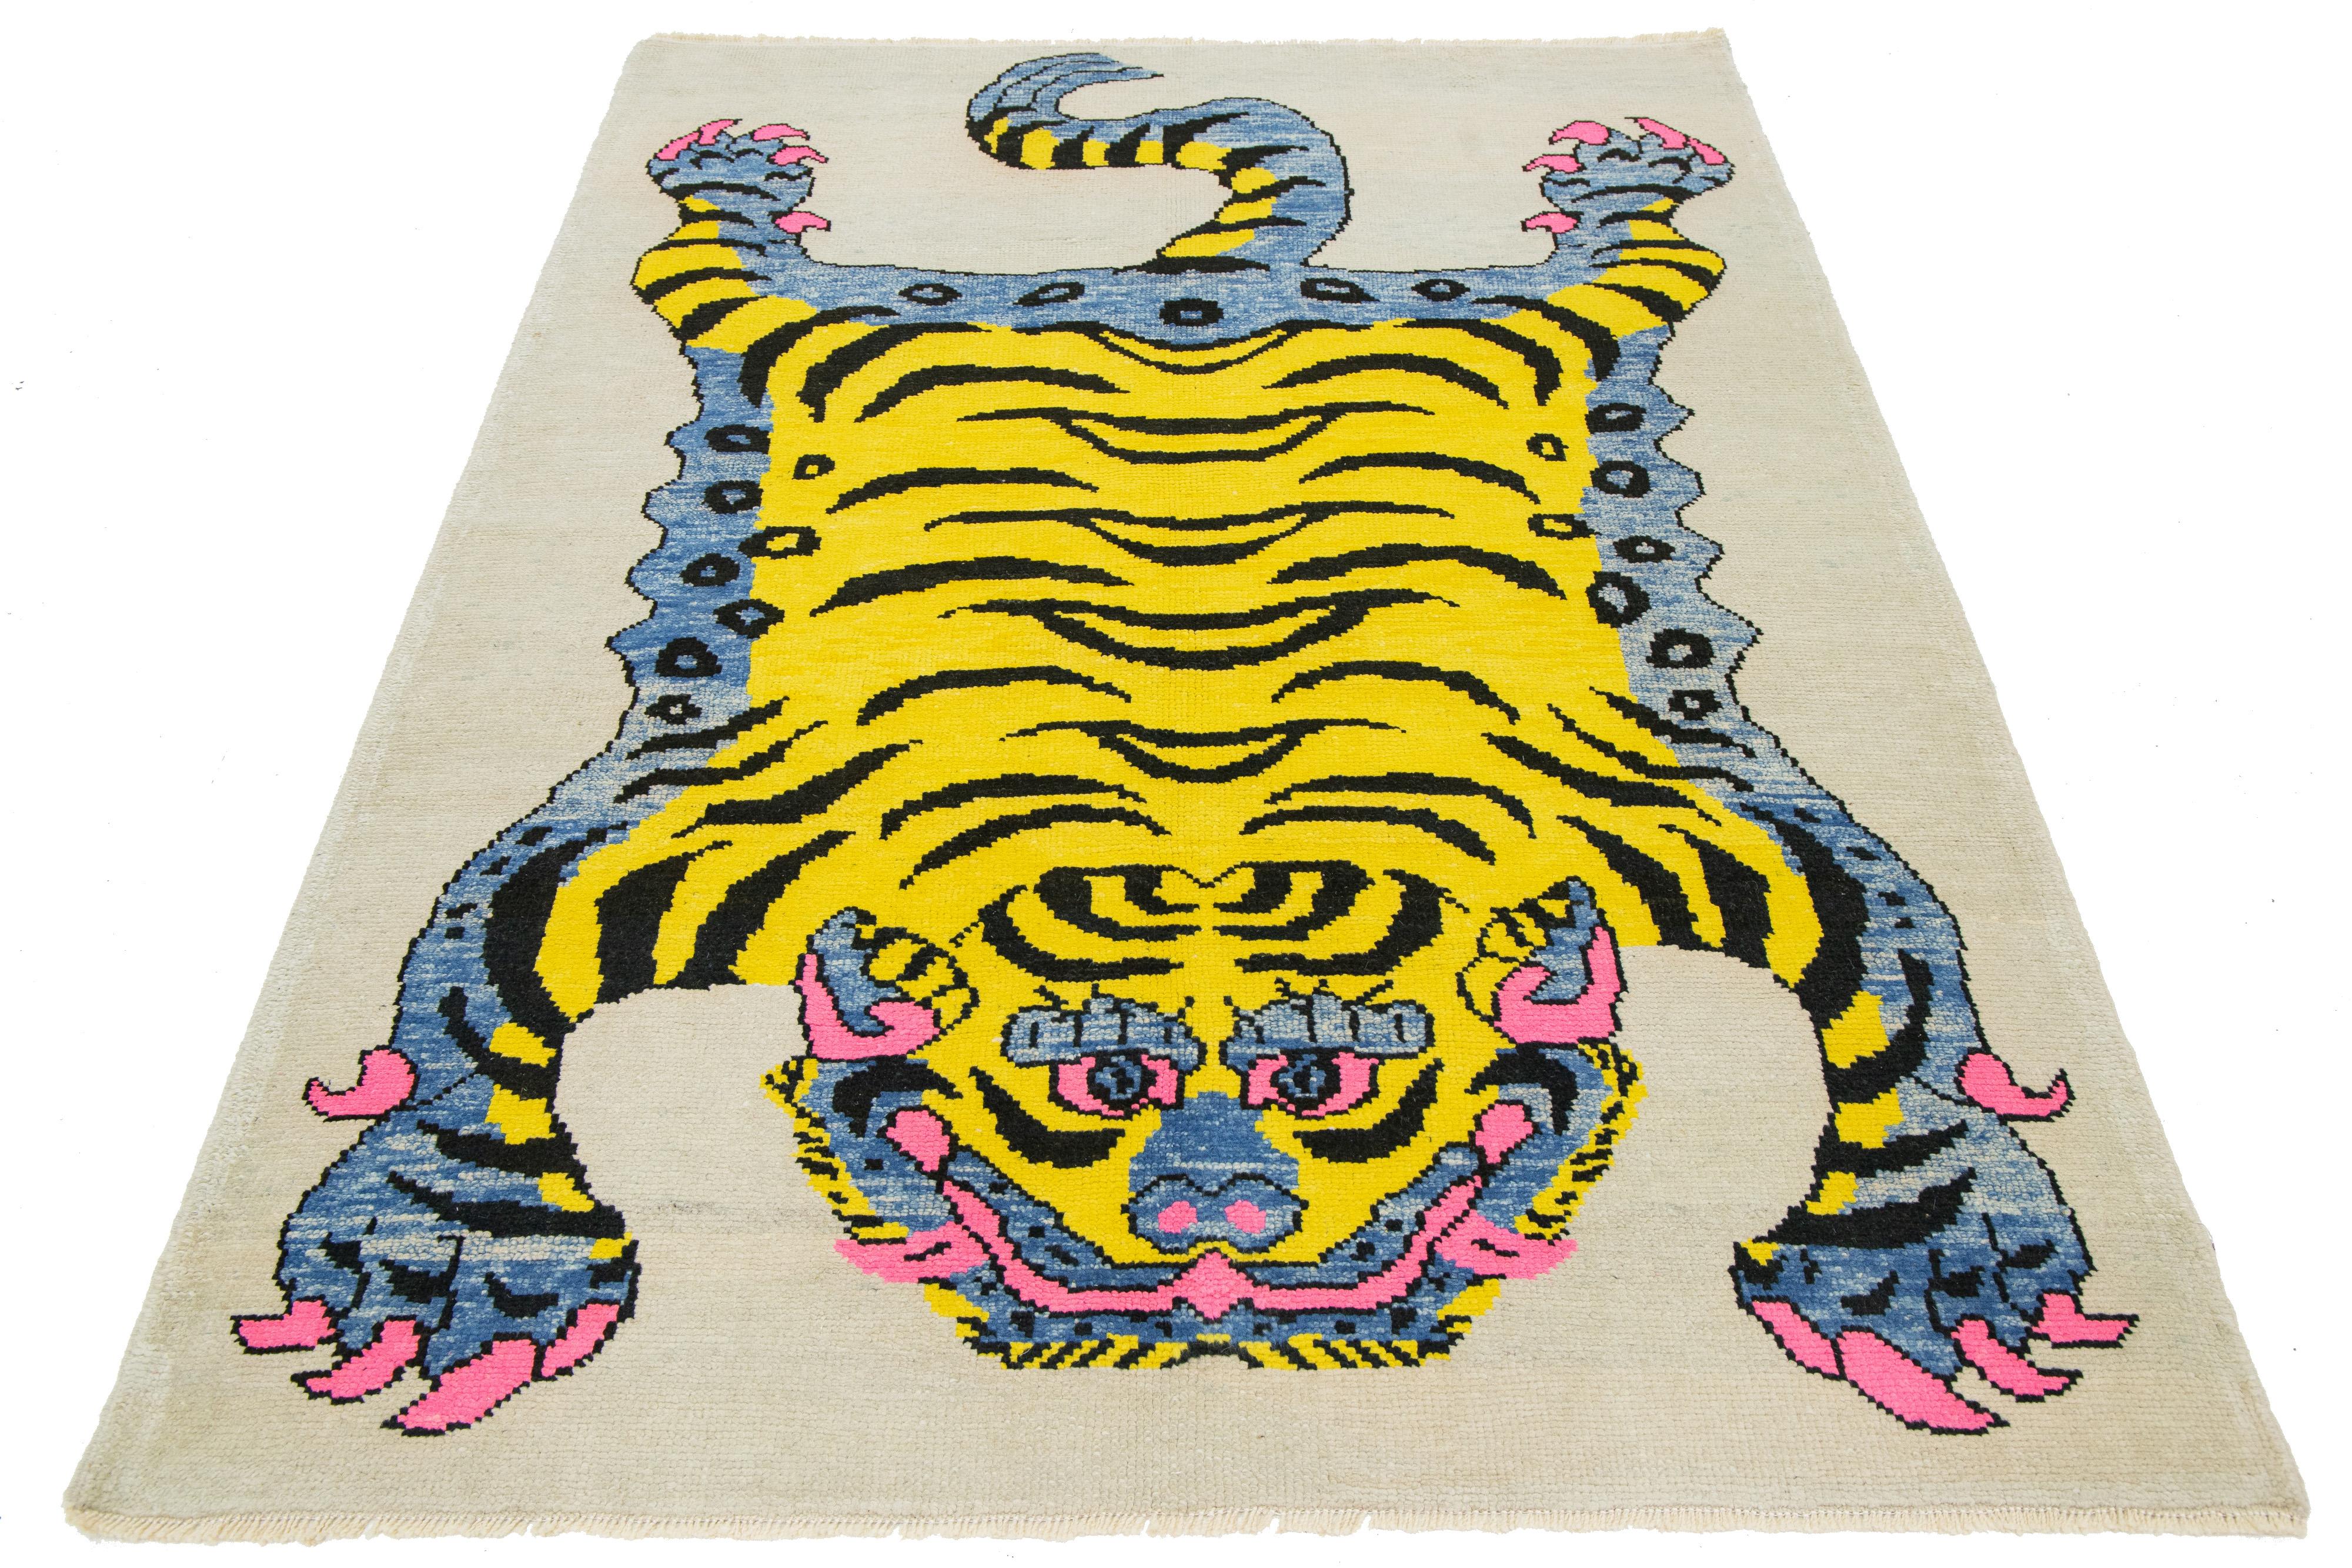 This Turkish Art Deco wool rug boasts a striking beige backdrop with black, yellow, gray, and pink accents and a captivating pictorial representation of a tiger.

This rug measures 5'5